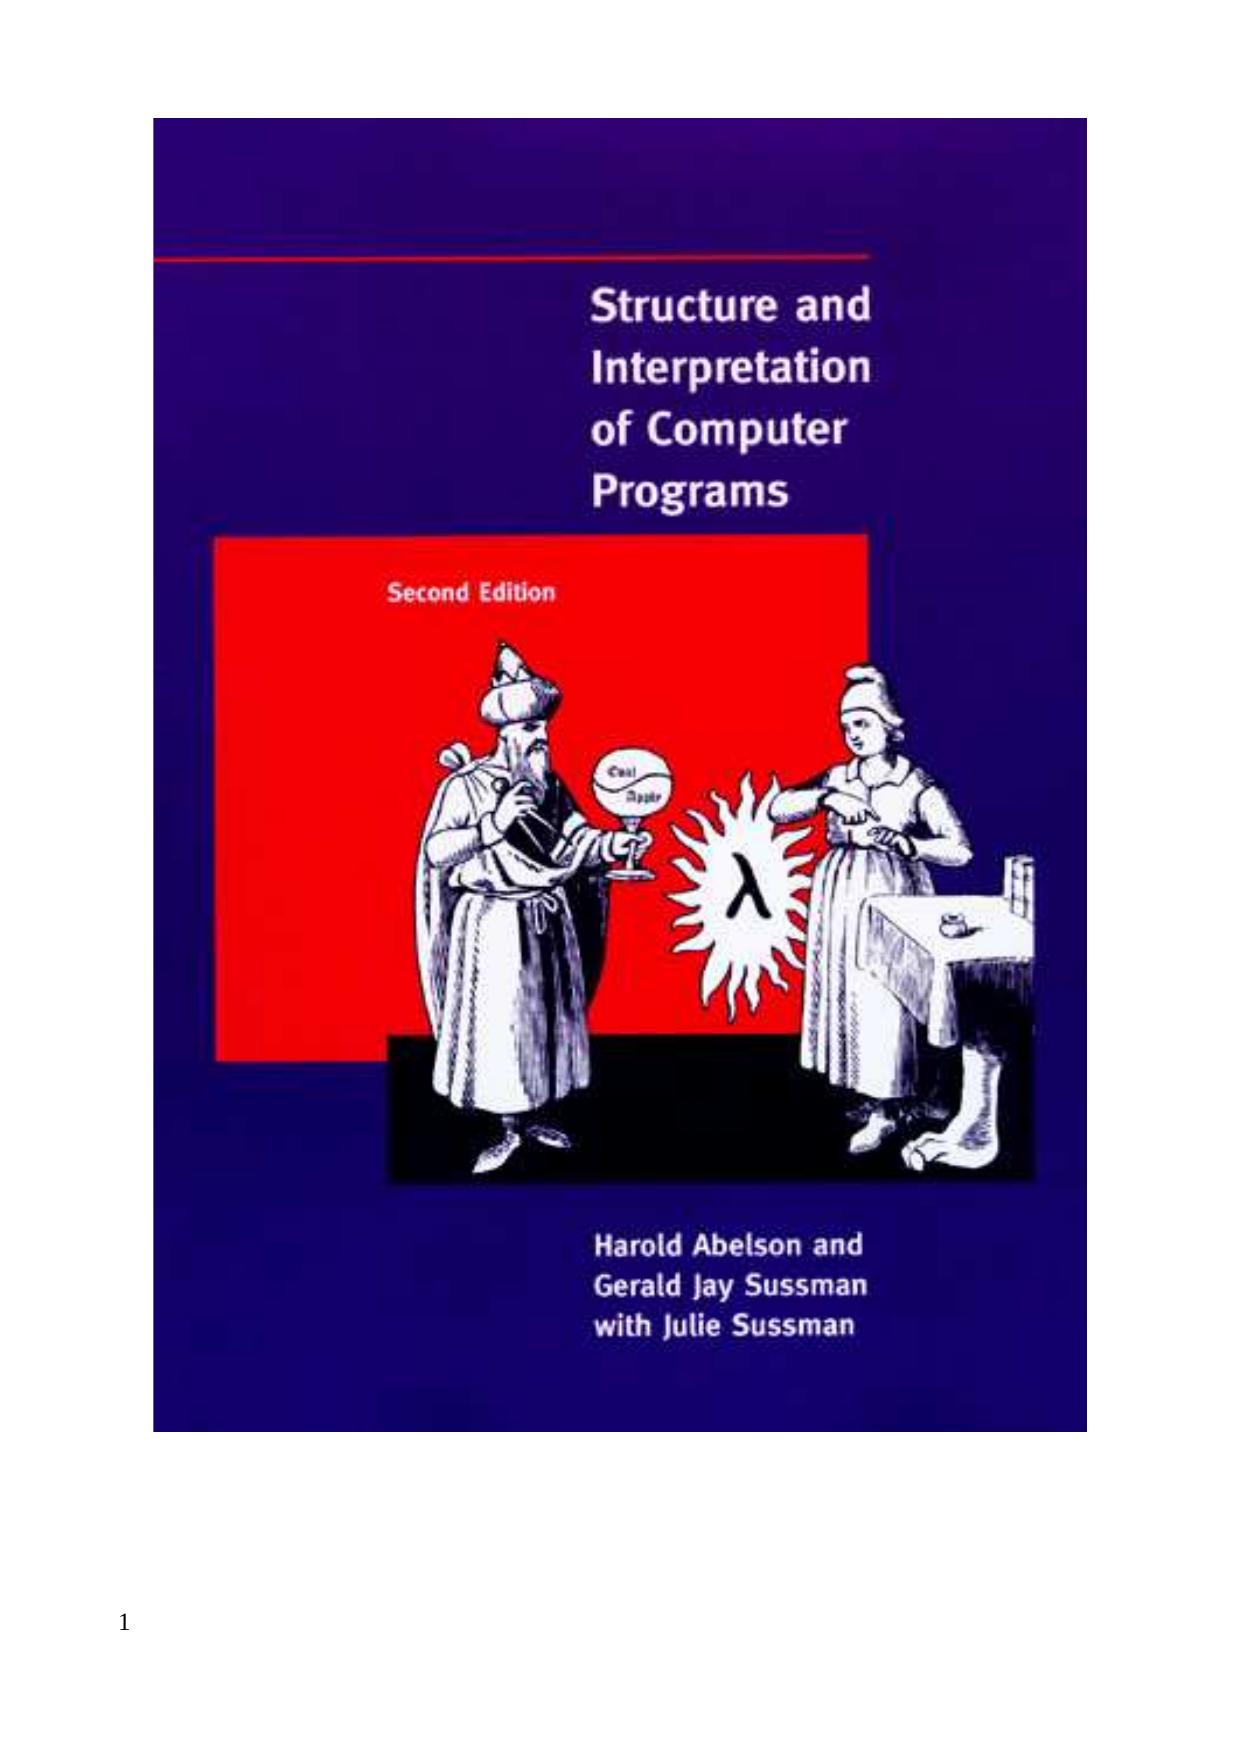 Structure and Interpretation of Computer Programs, Second Edition by Harold Abelson Gerald Jay Sussman Julie Sussman